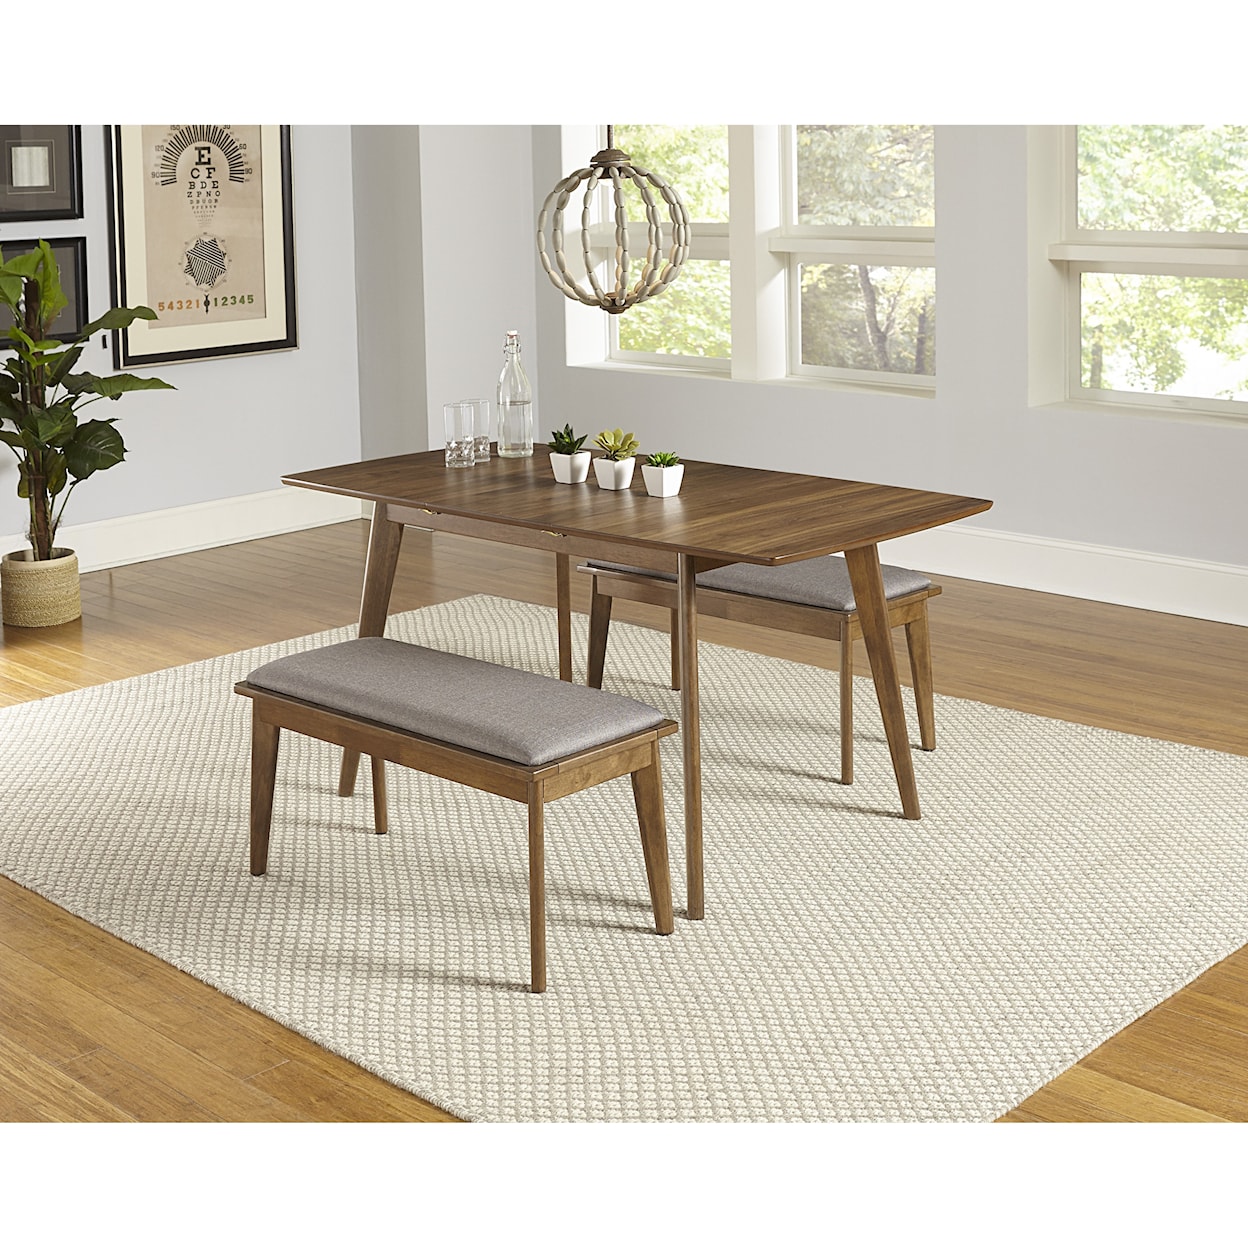 Progressive Furniture Arcade 3-Piece Butterfly Table Set with 2 Benches